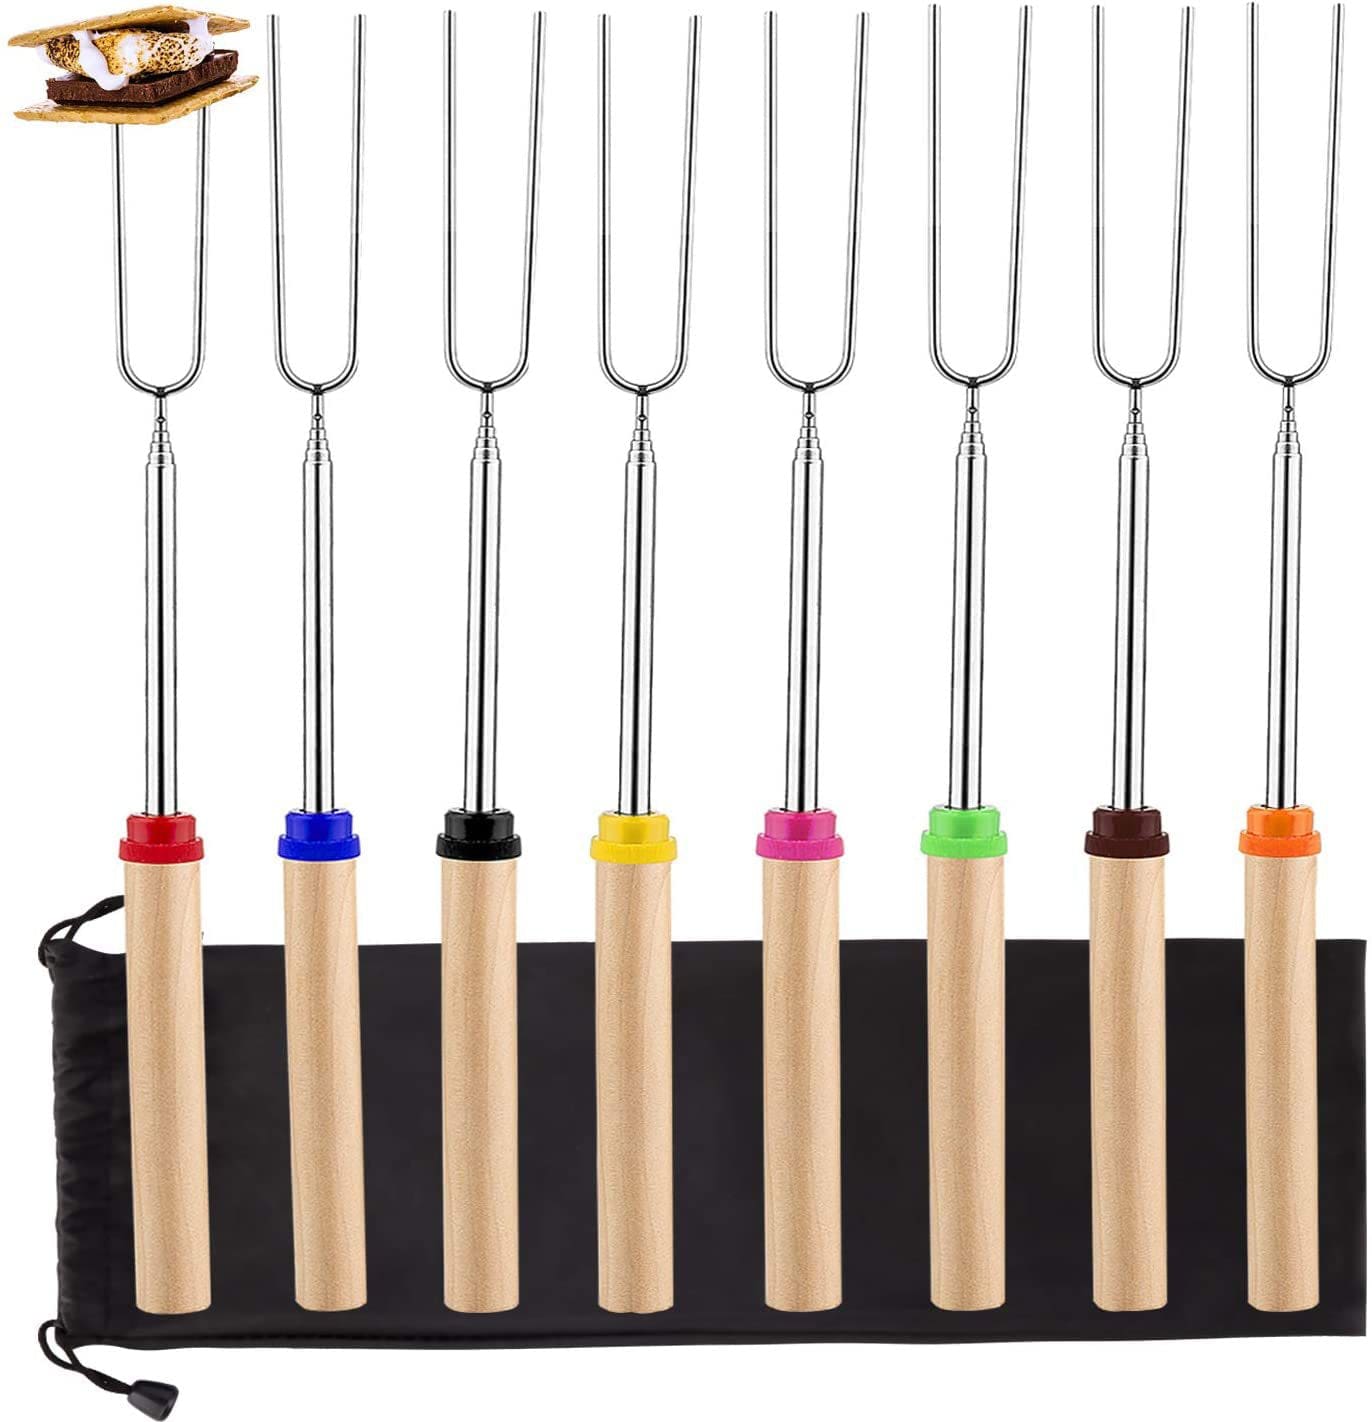 Retractable Wooden Stick Marshmallow Stick Grill Fork - 8pcs nonwoven bags - 0 - HomeRelaxOfficial